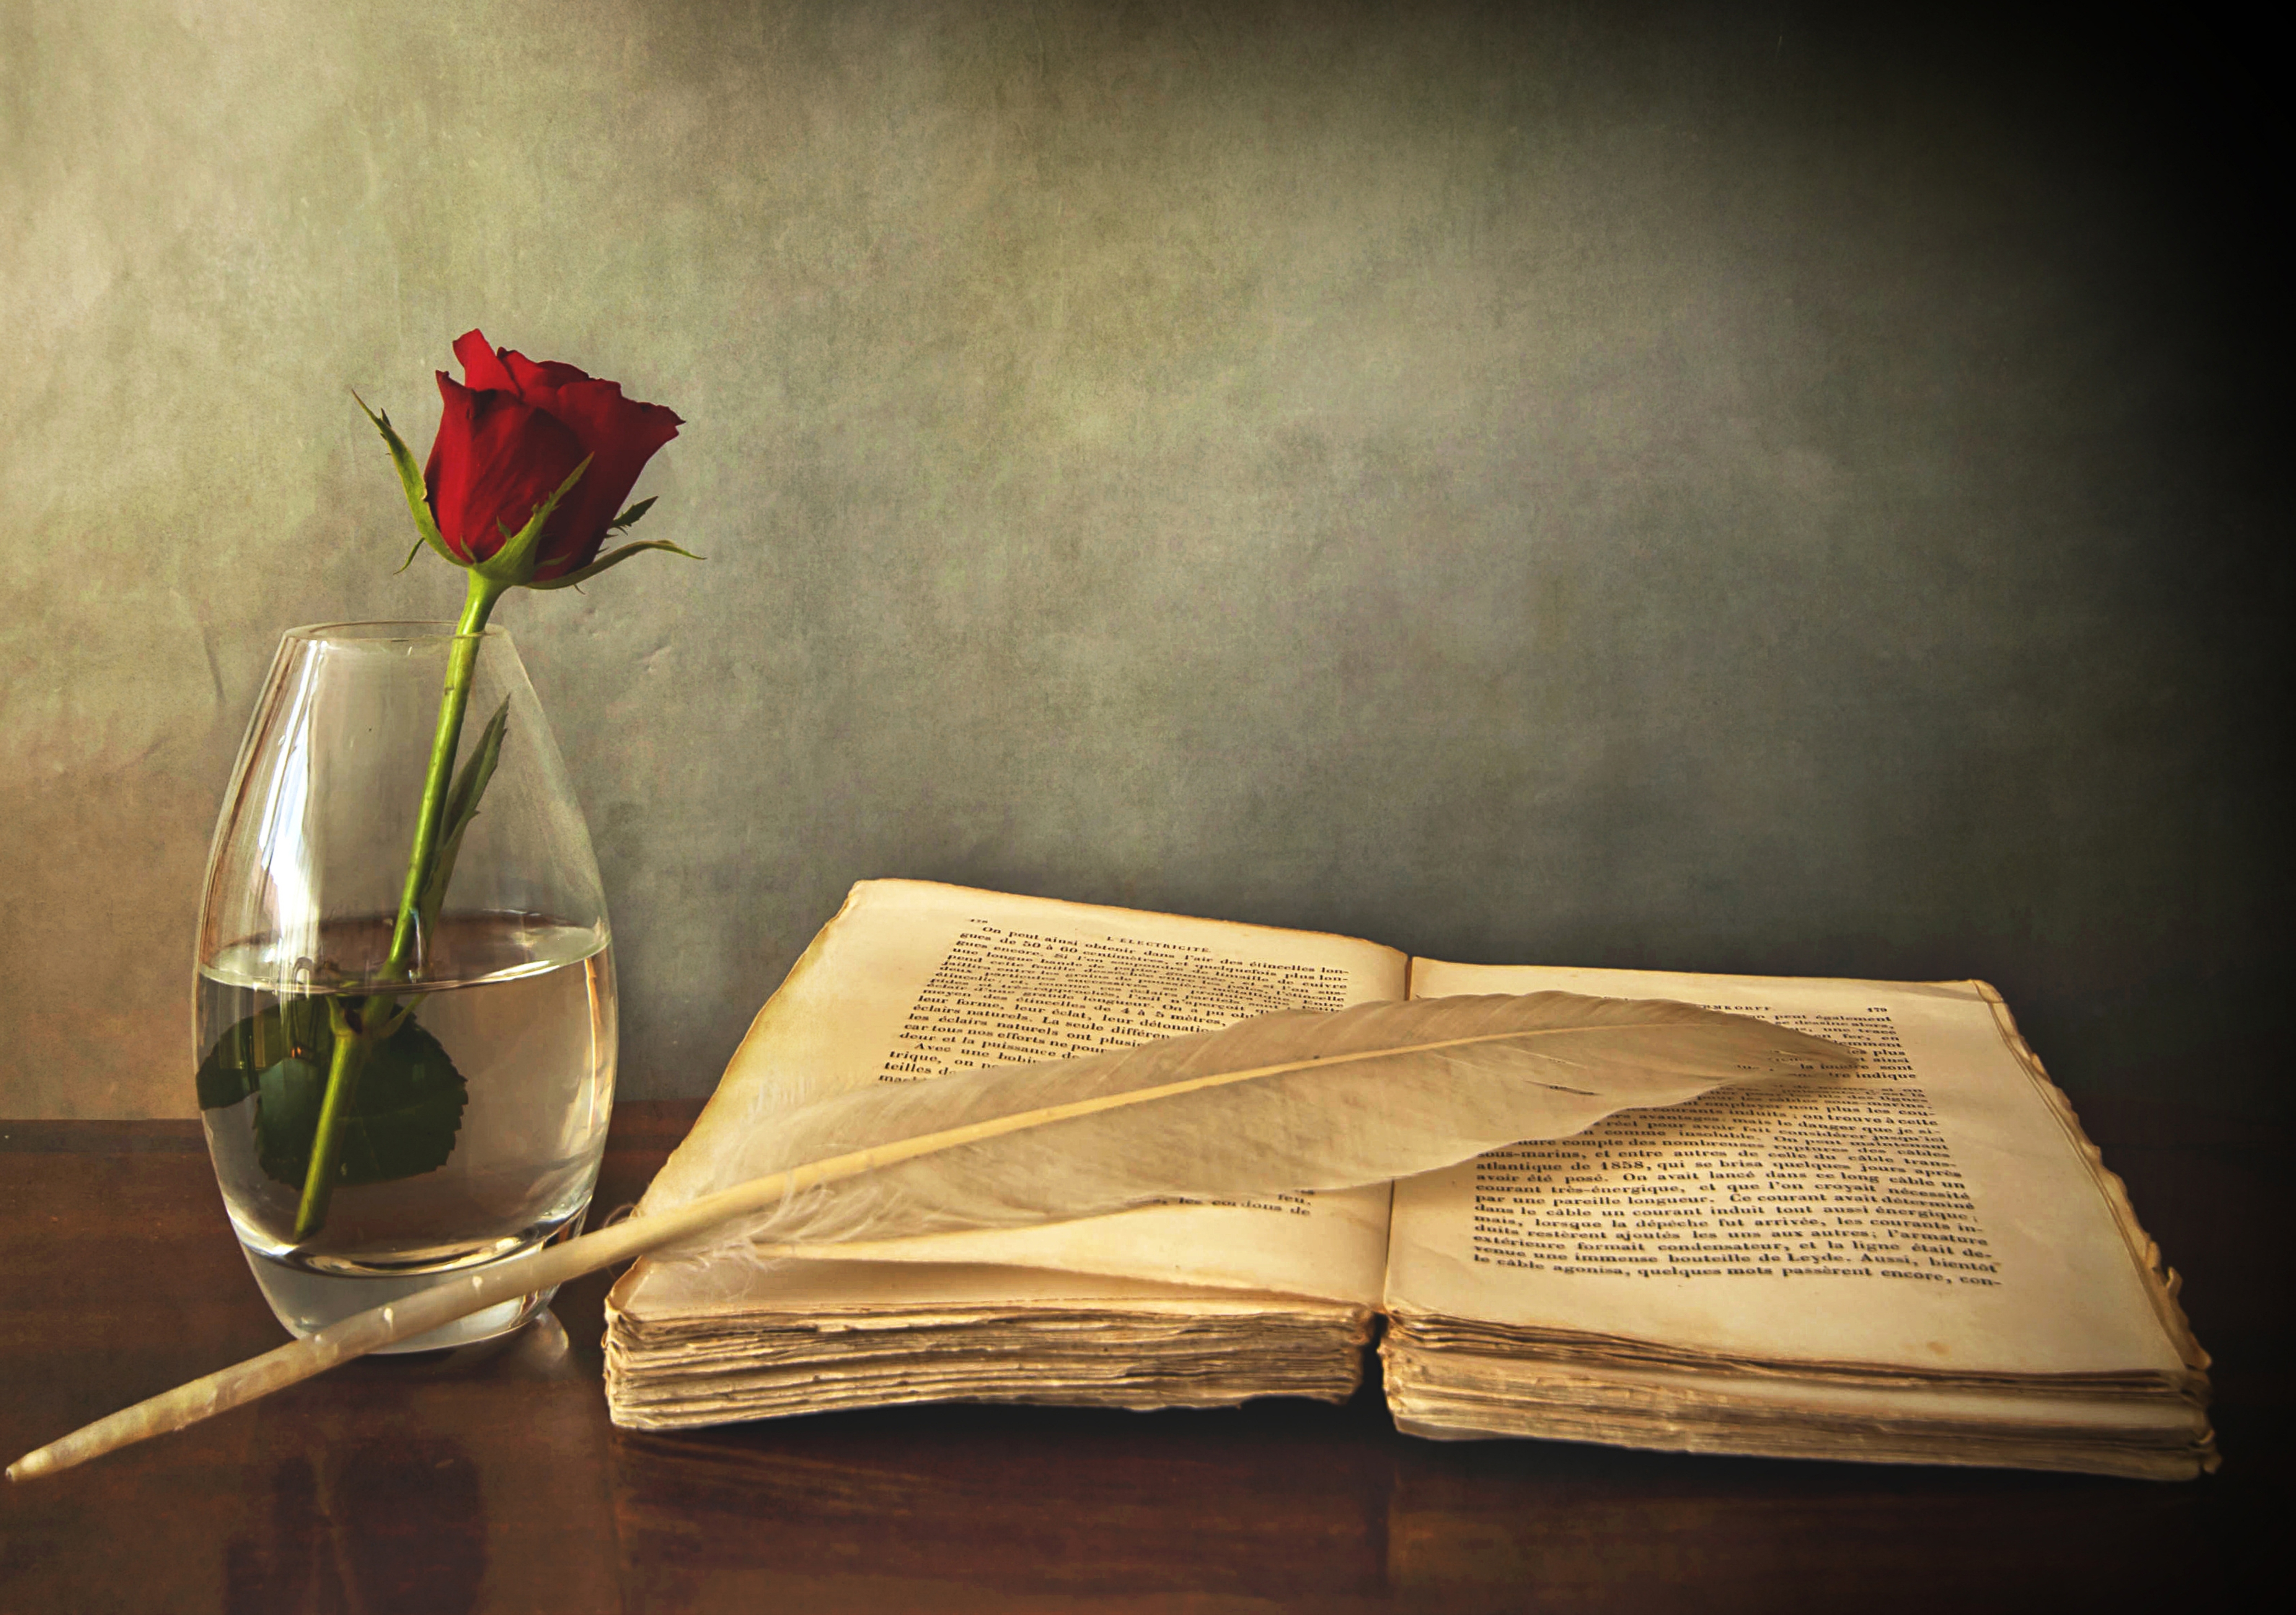 red, miscellanea, feather, miscellaneous, rose flower, rose, old, table, vase, book, pen